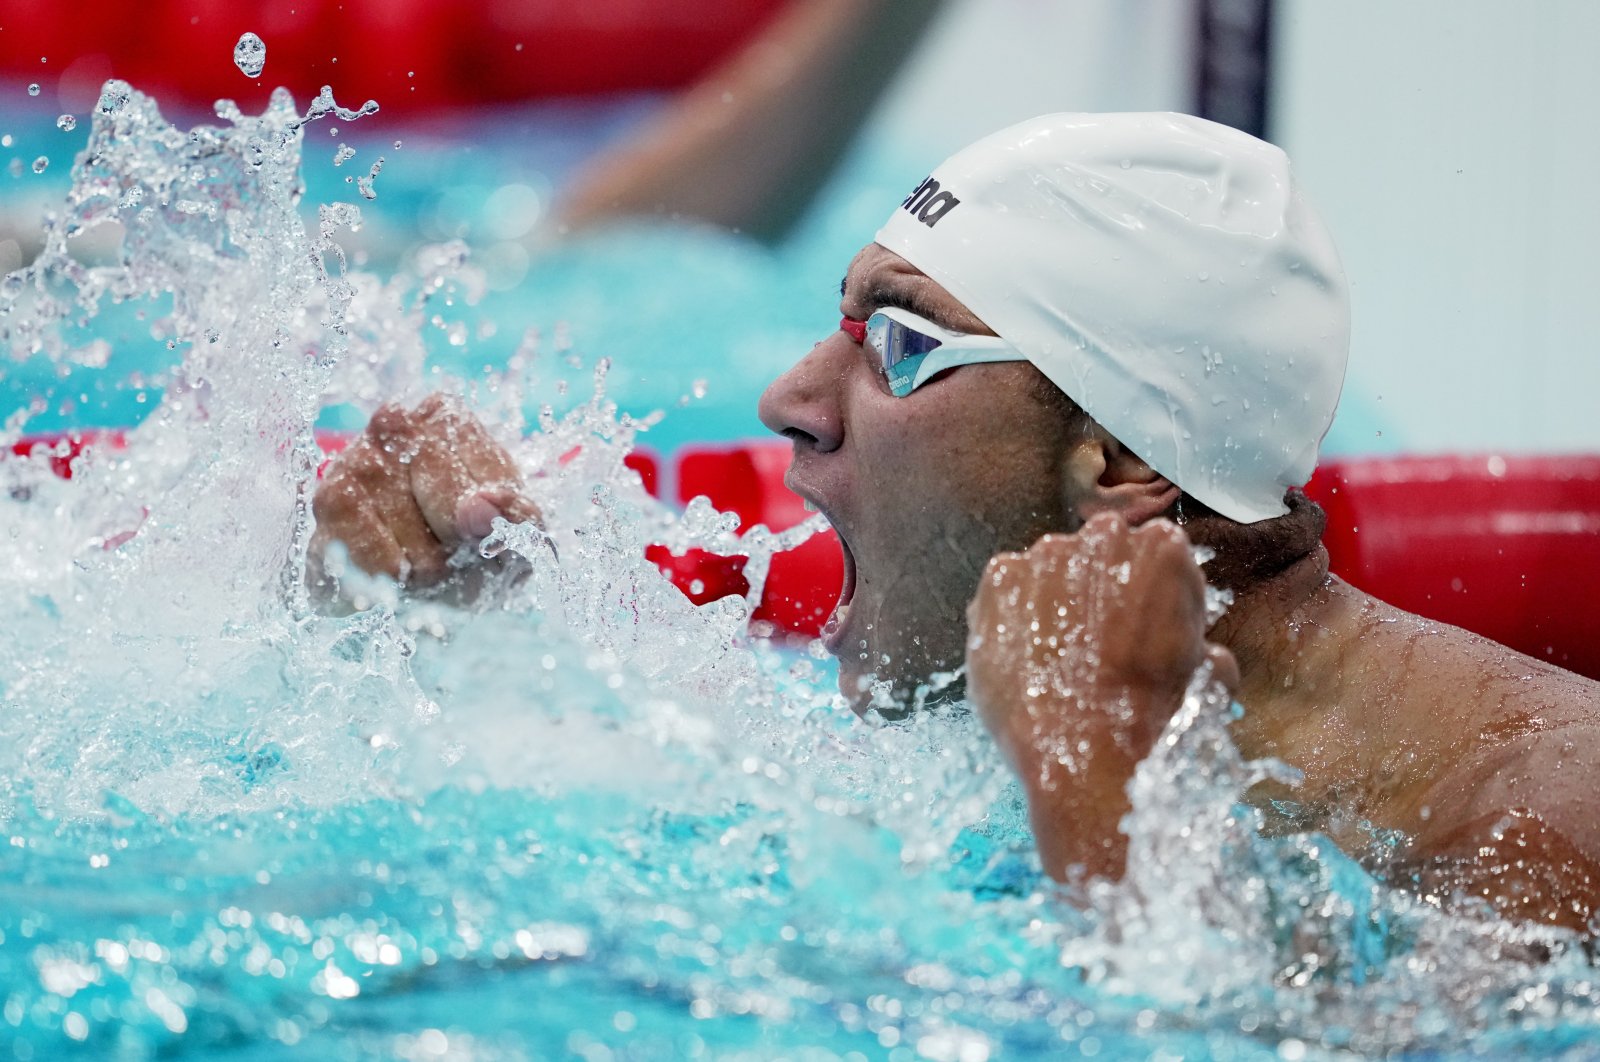 Tunisia's Ahmed Hafnaoui reacts after winning gold in Tokyo 2020 Olympics Men's 400-meter Freestyle, Tokyo, Japan - July 25, 2021. 